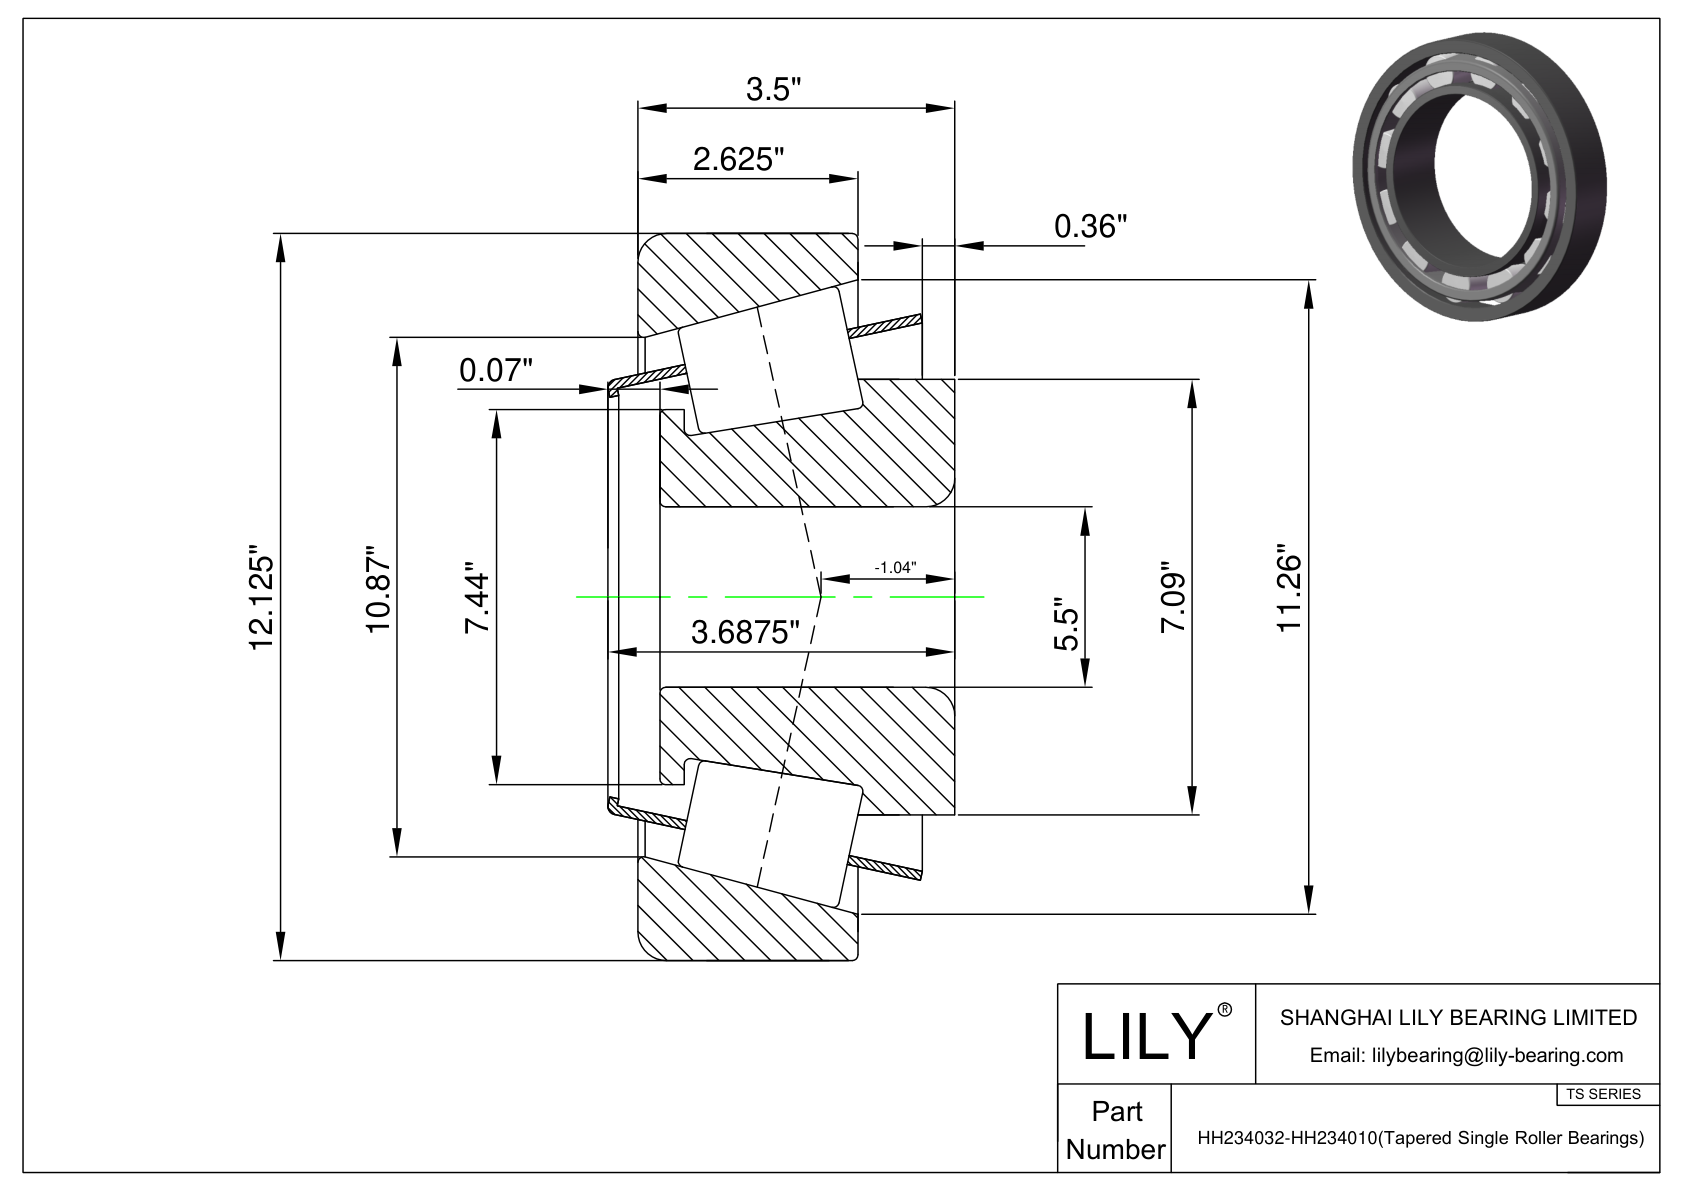 HH234032-HH234010 TS (Tapered Single Roller Bearings) (Imperial) cad drawing